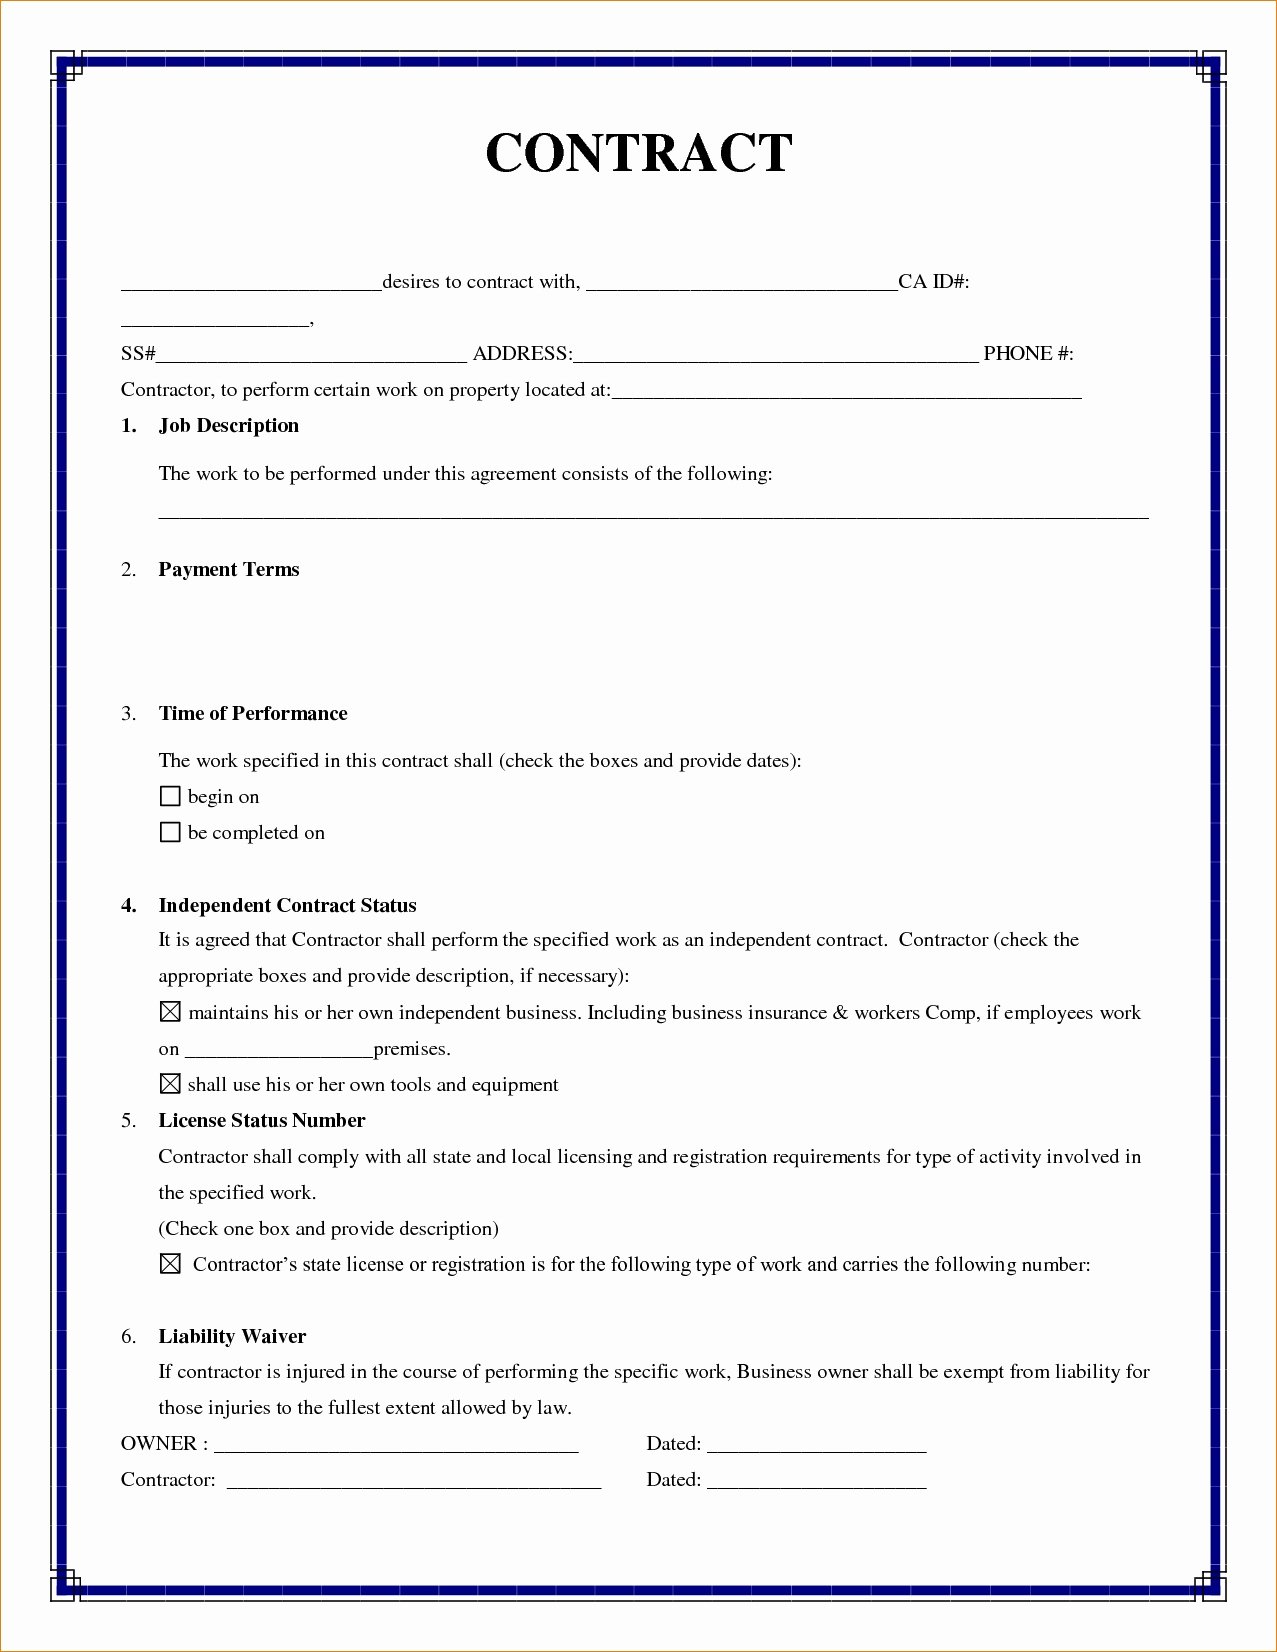 Residential Construction Contract Template Free Unique Simple Contract Agreement